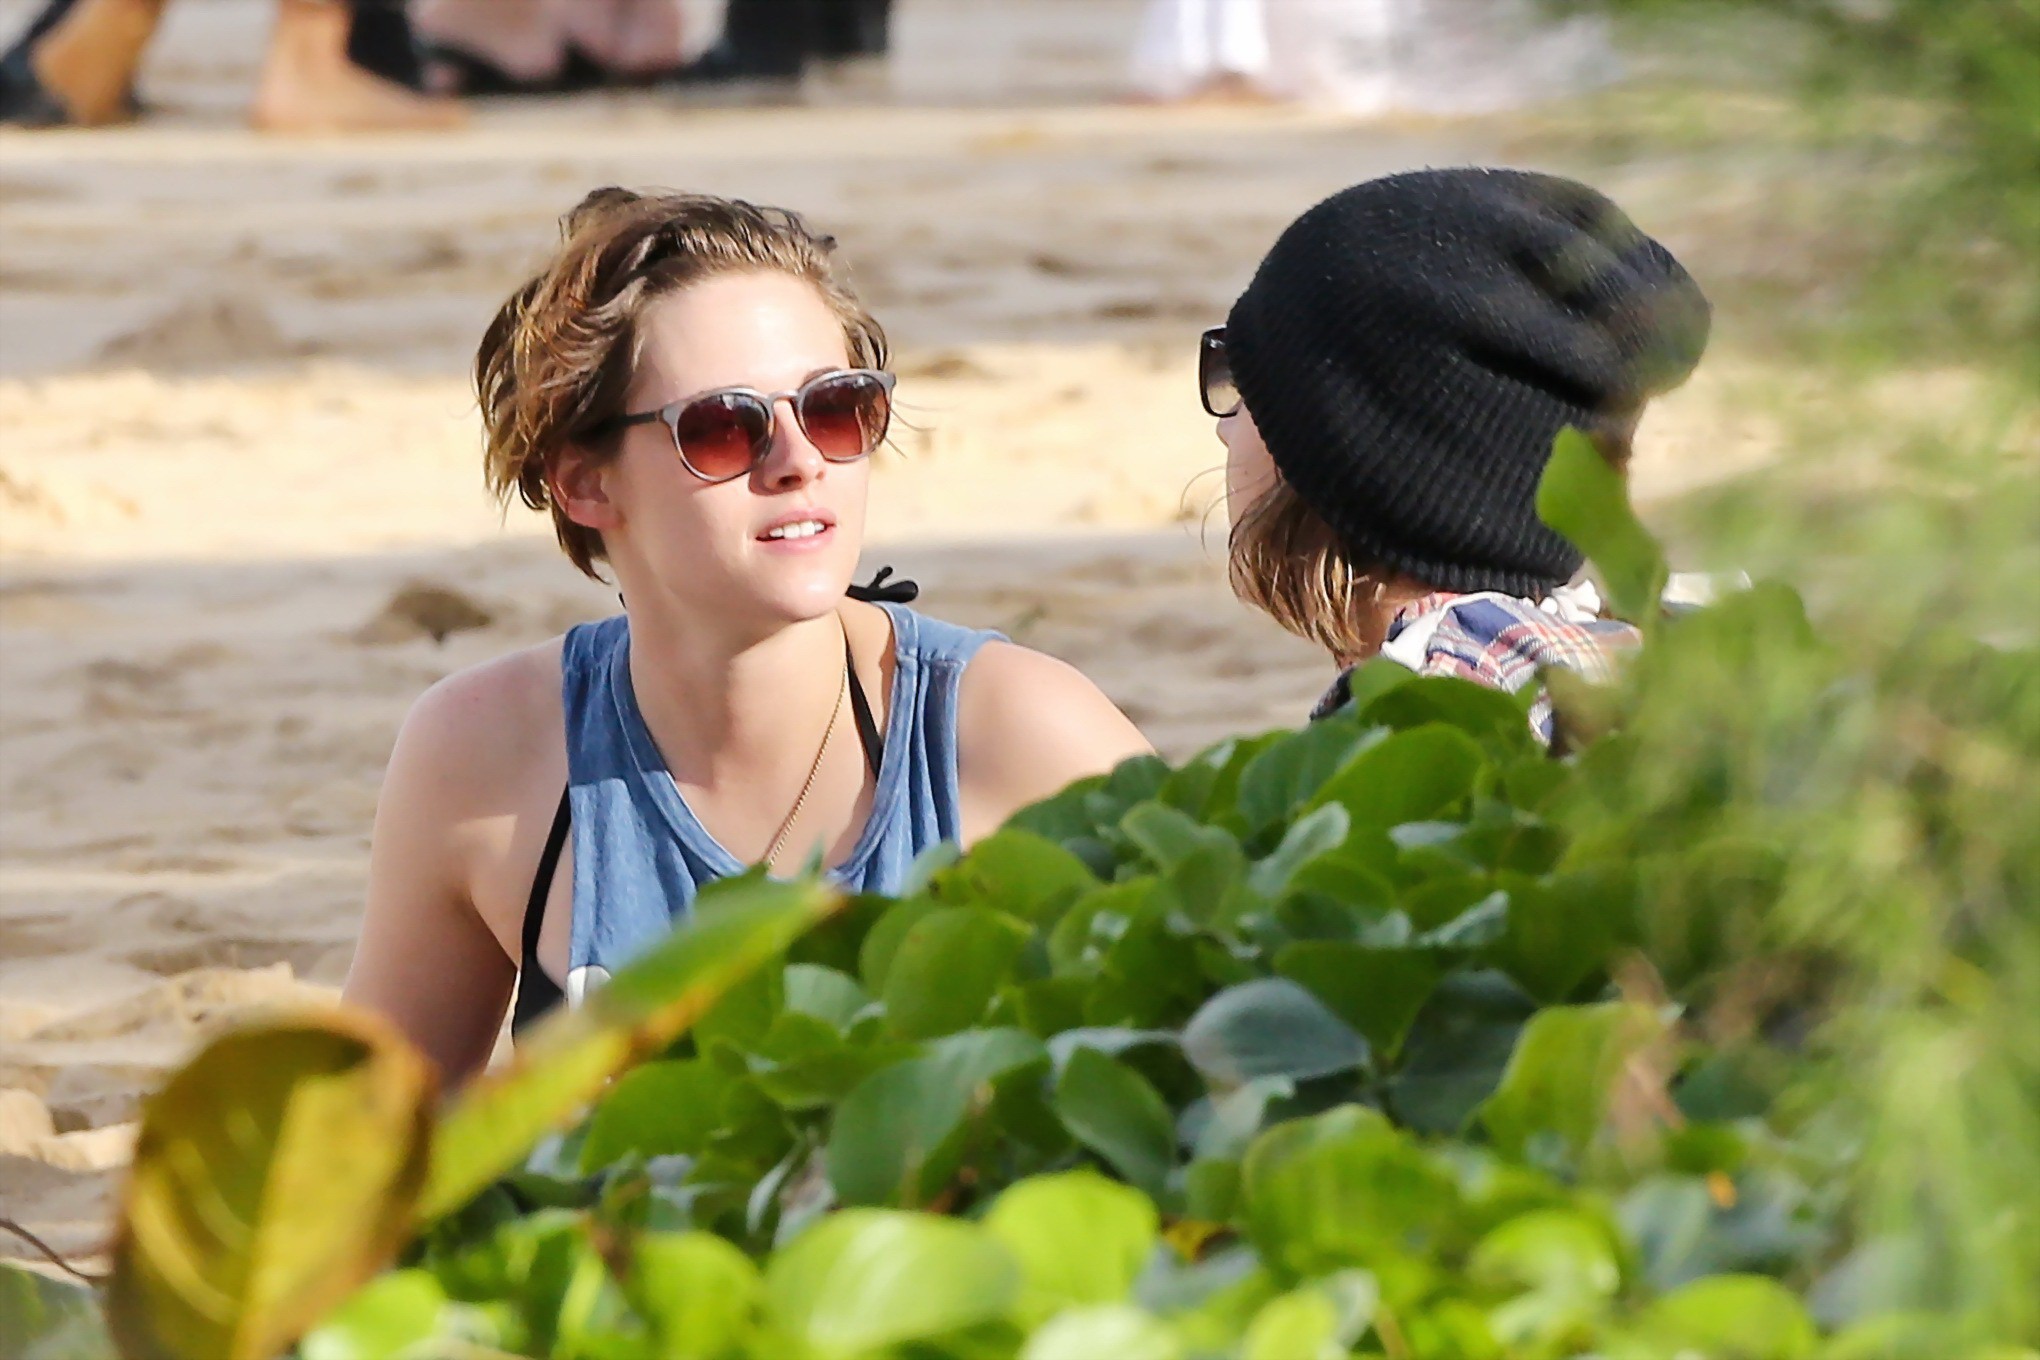 Kristen Stewart in bikini top and shorts kissing with some girl on the beach in  #75176304